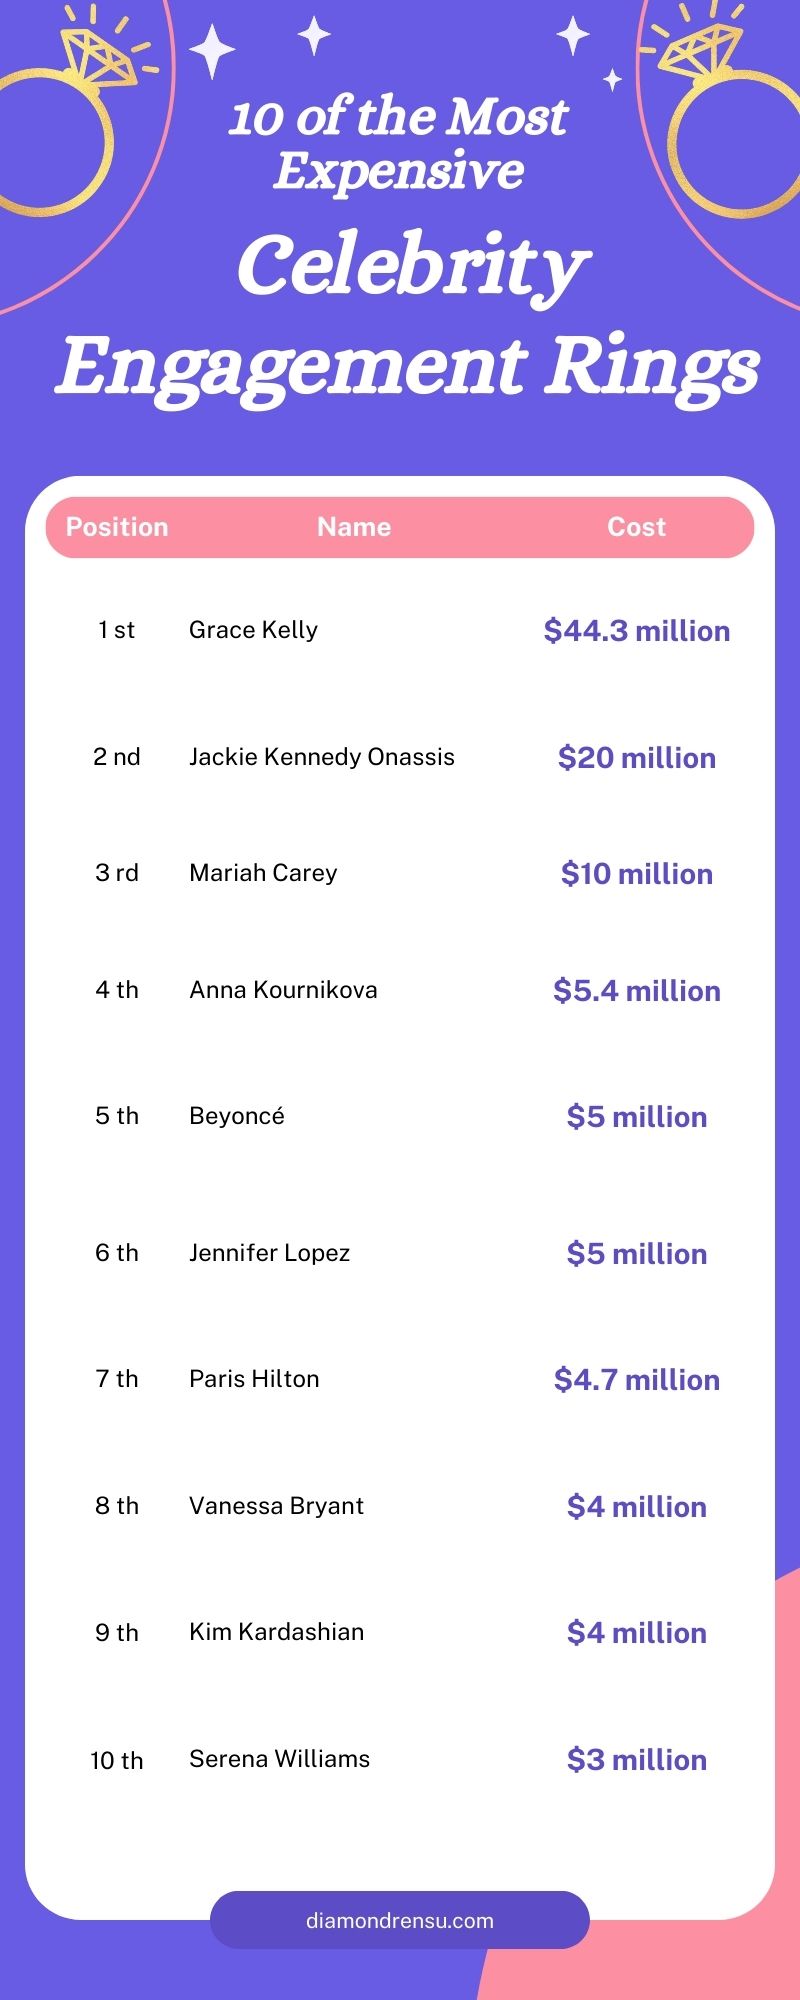 10 of the Most Expensive Celebrity Engagement Rings Infographic